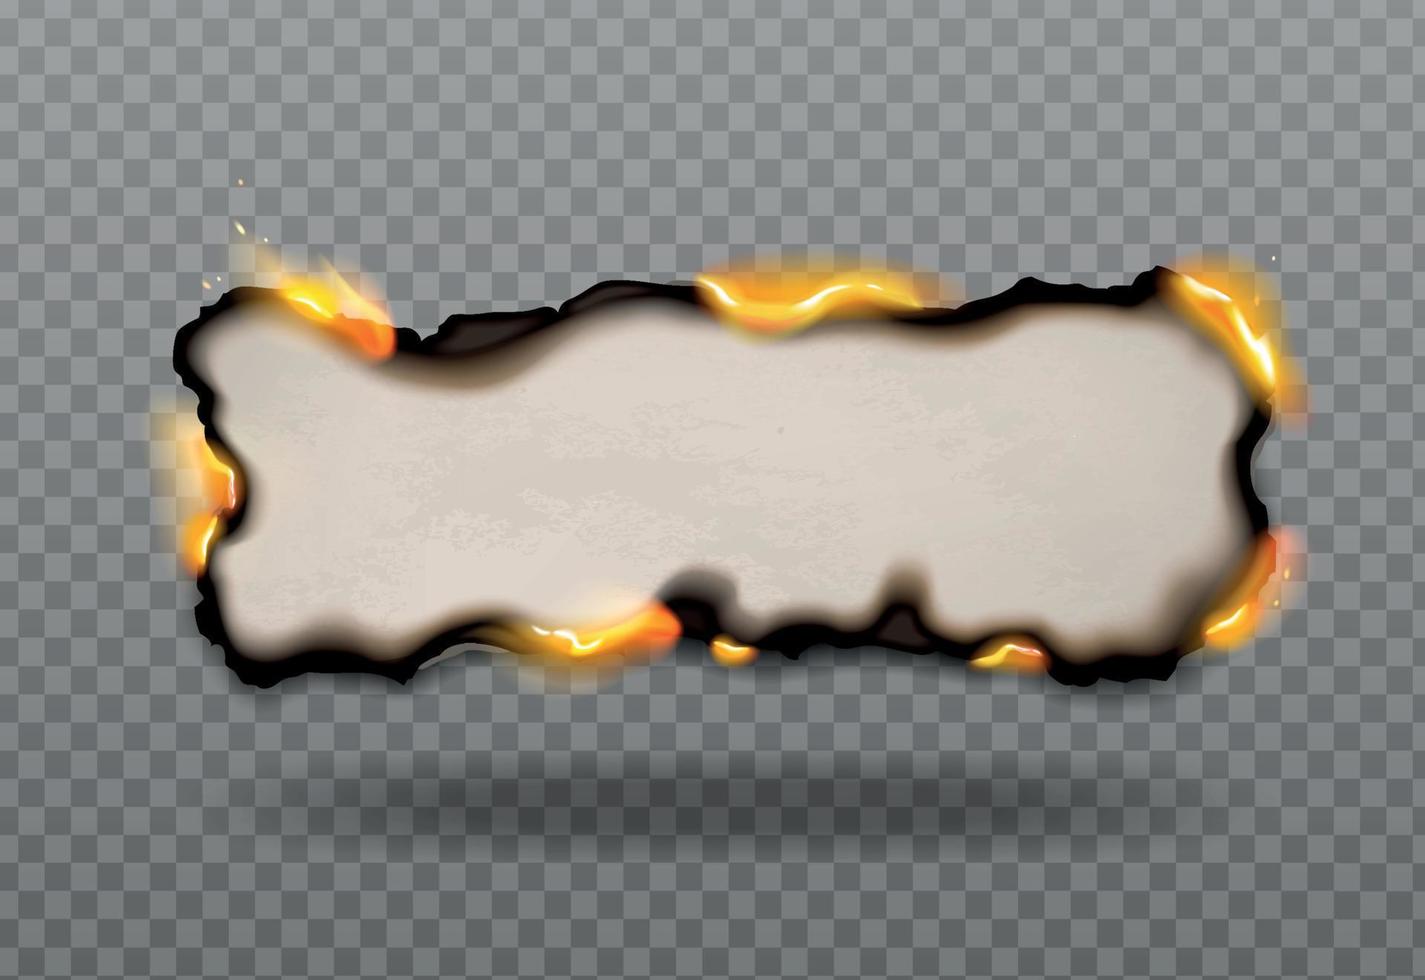 Burning Paper Hole Composition vector